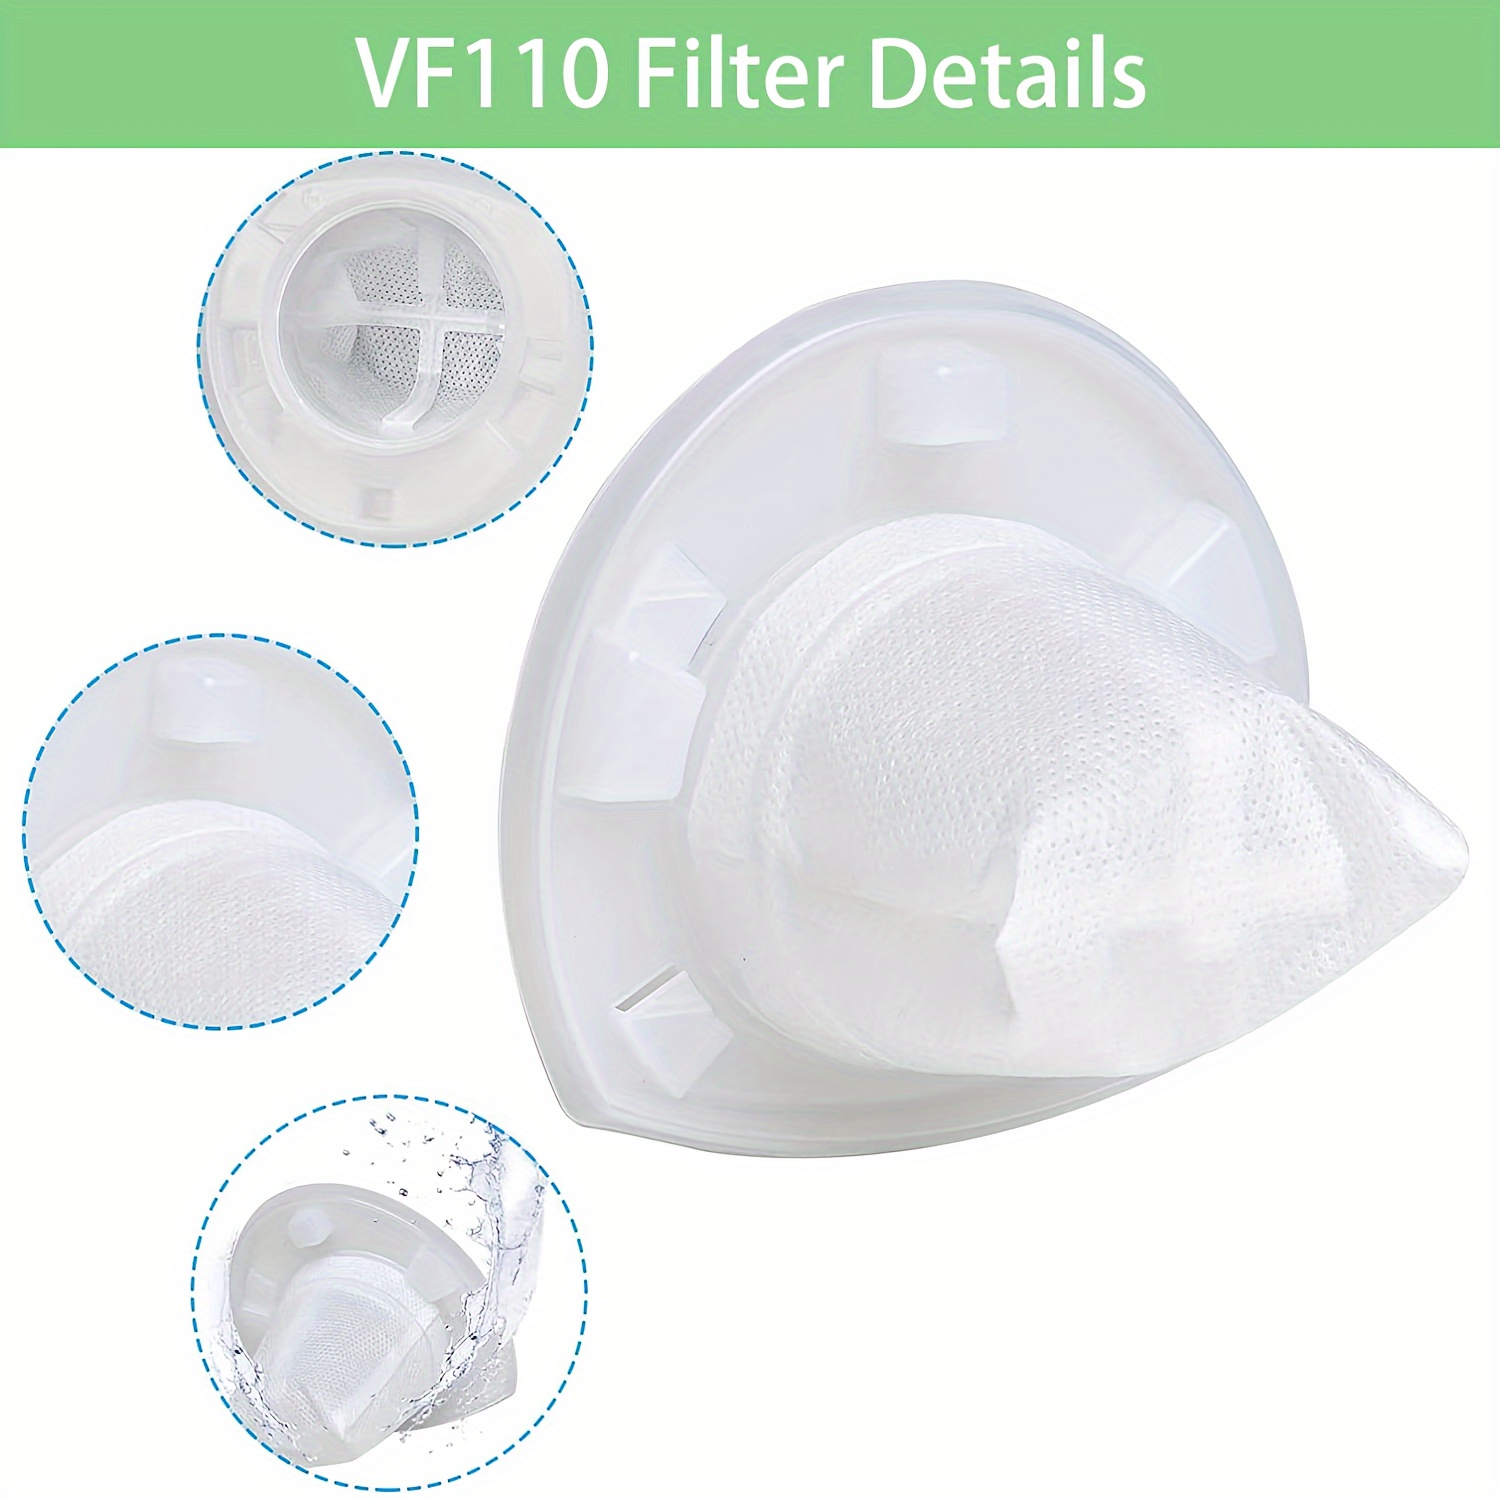 Vacuum Filters for Black & Decker Chv1410l Vacuums 4 Pack